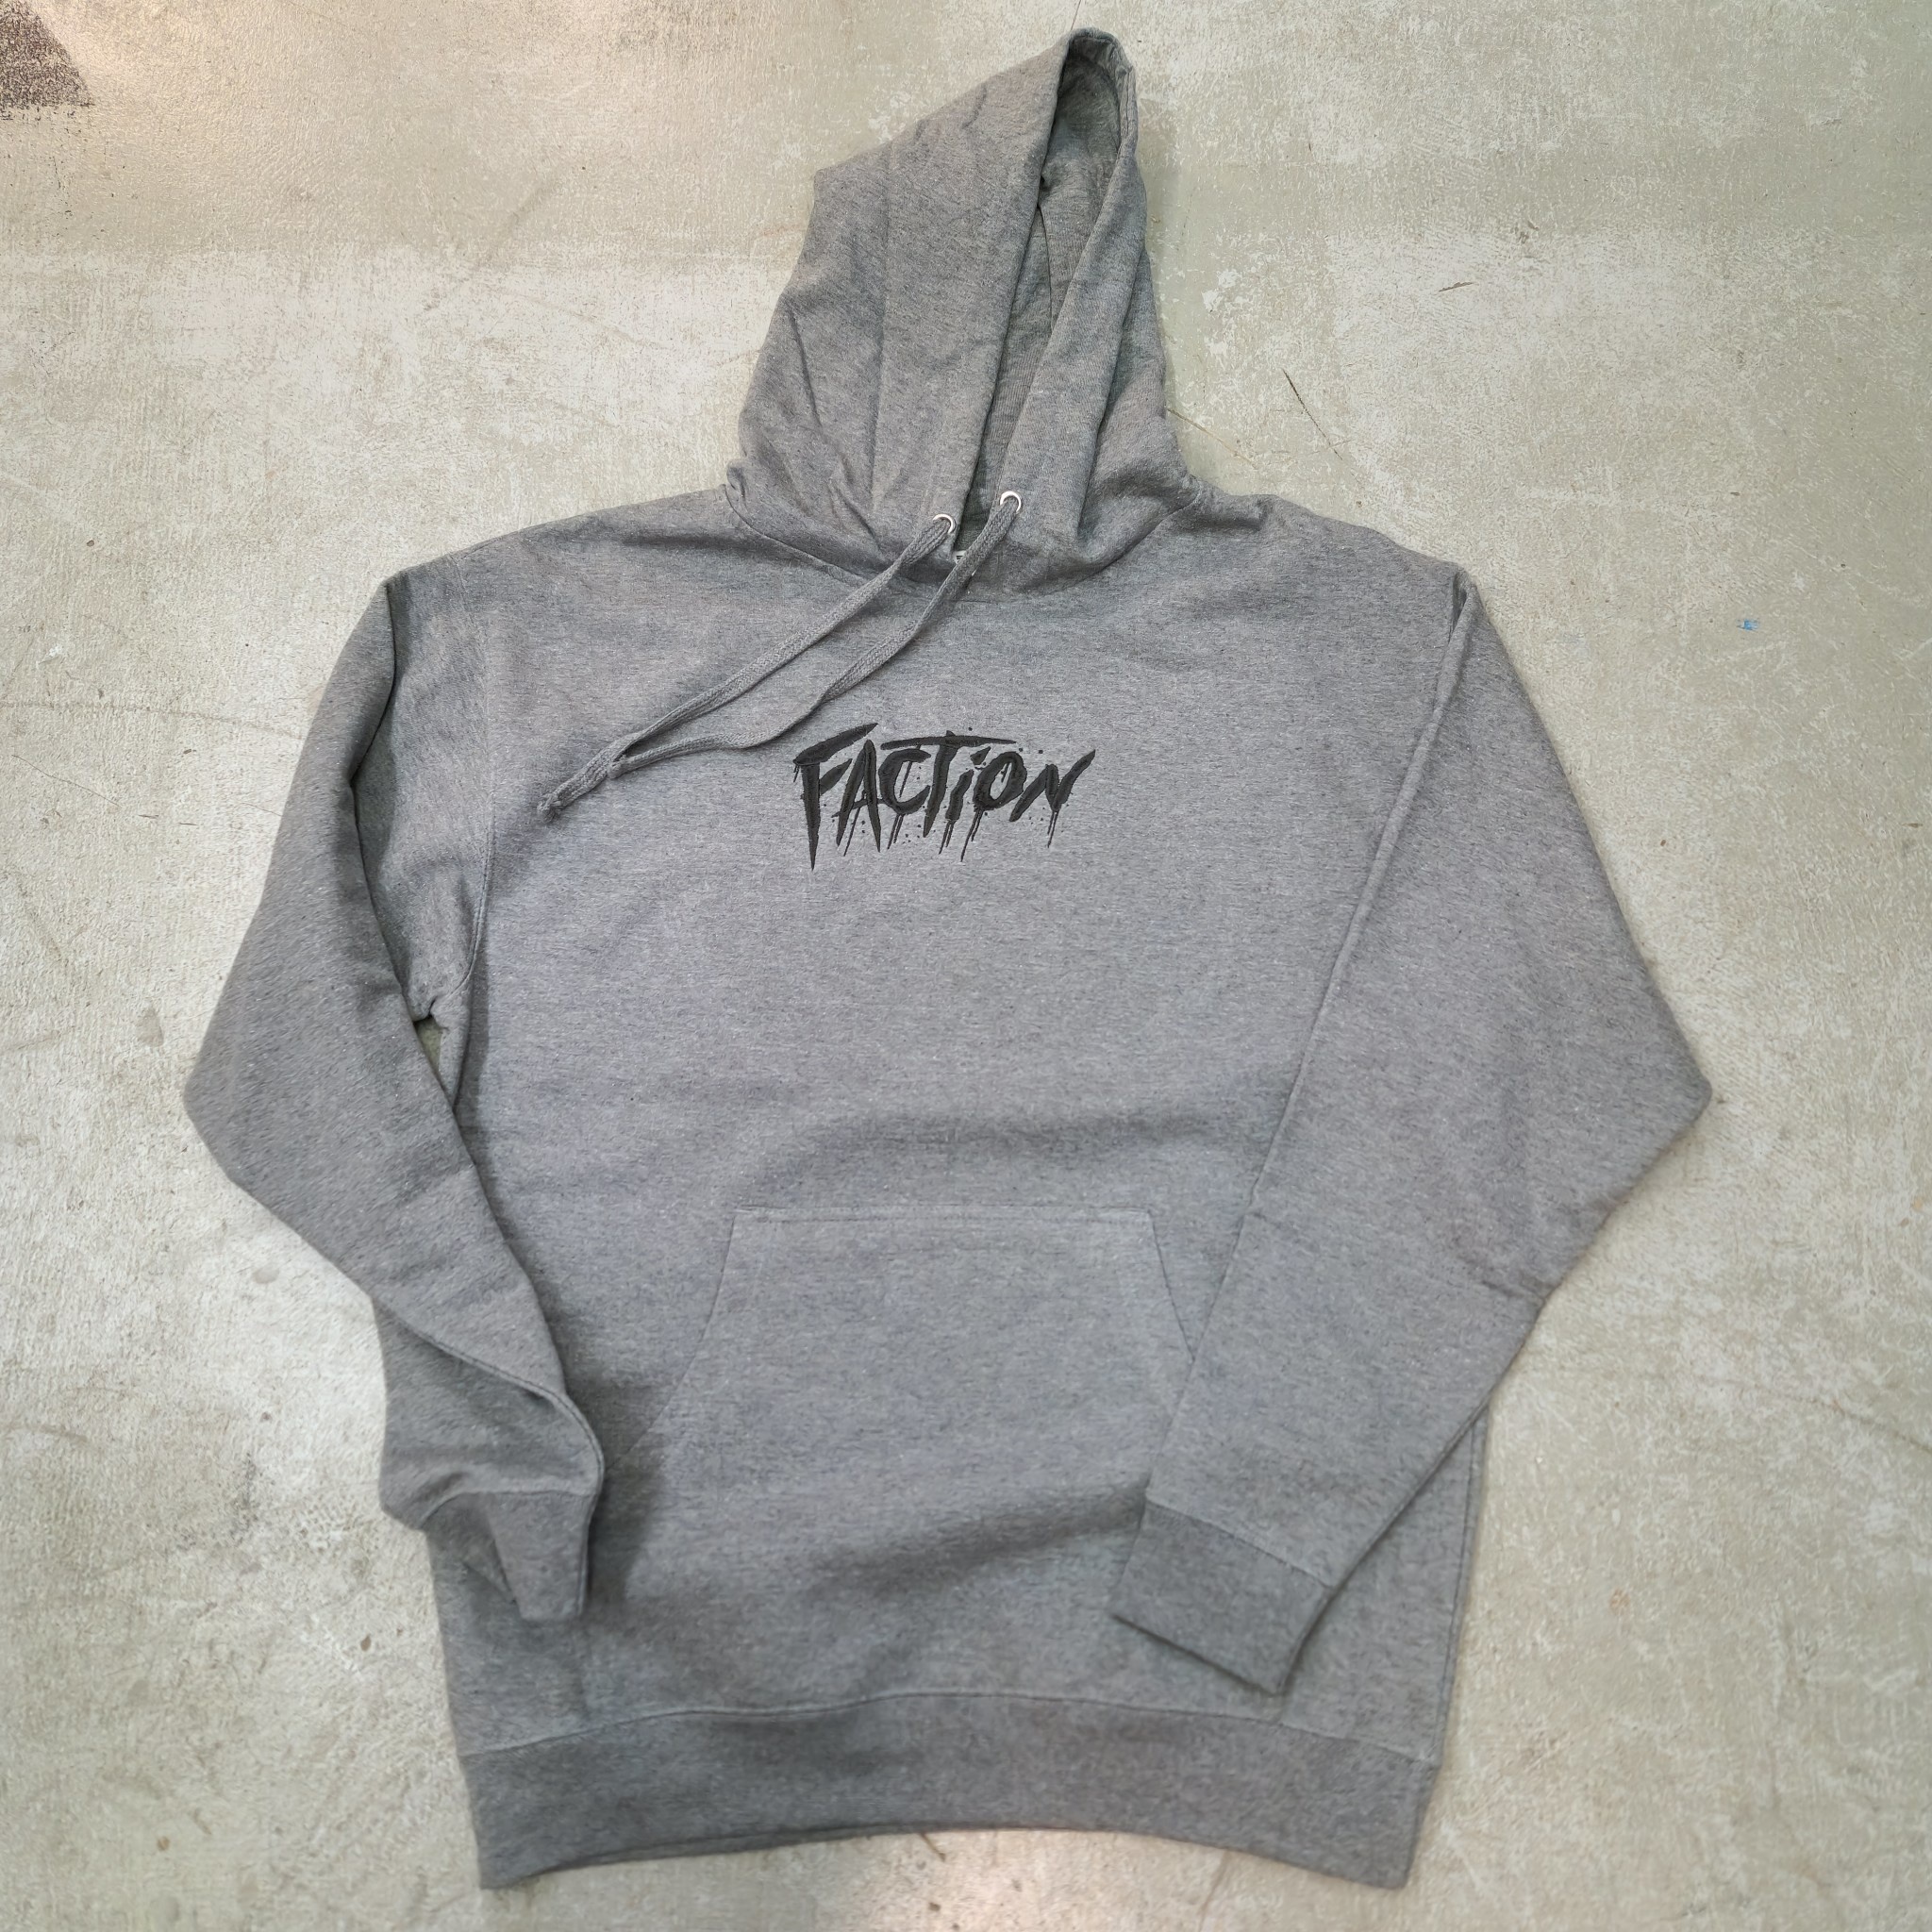 Faction Embroidered Hoodie - - Faction Grey Heather Boardshop